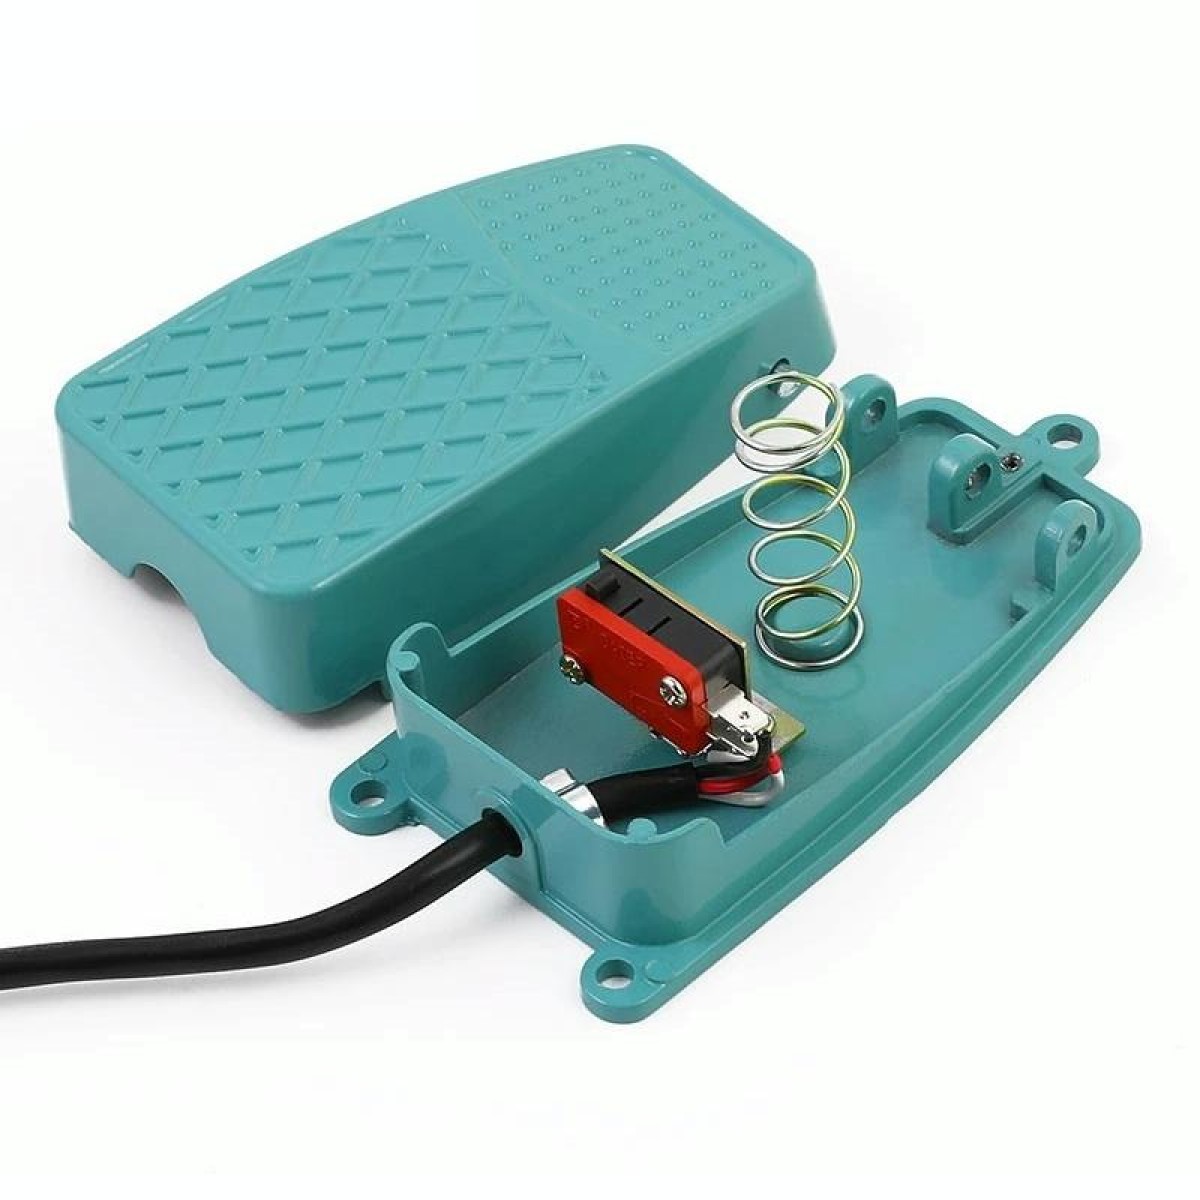 TFS-2 AC 250V 10A Anti-slip Metal Case Foot Control Pedal Switch, Cable Length: 90cm